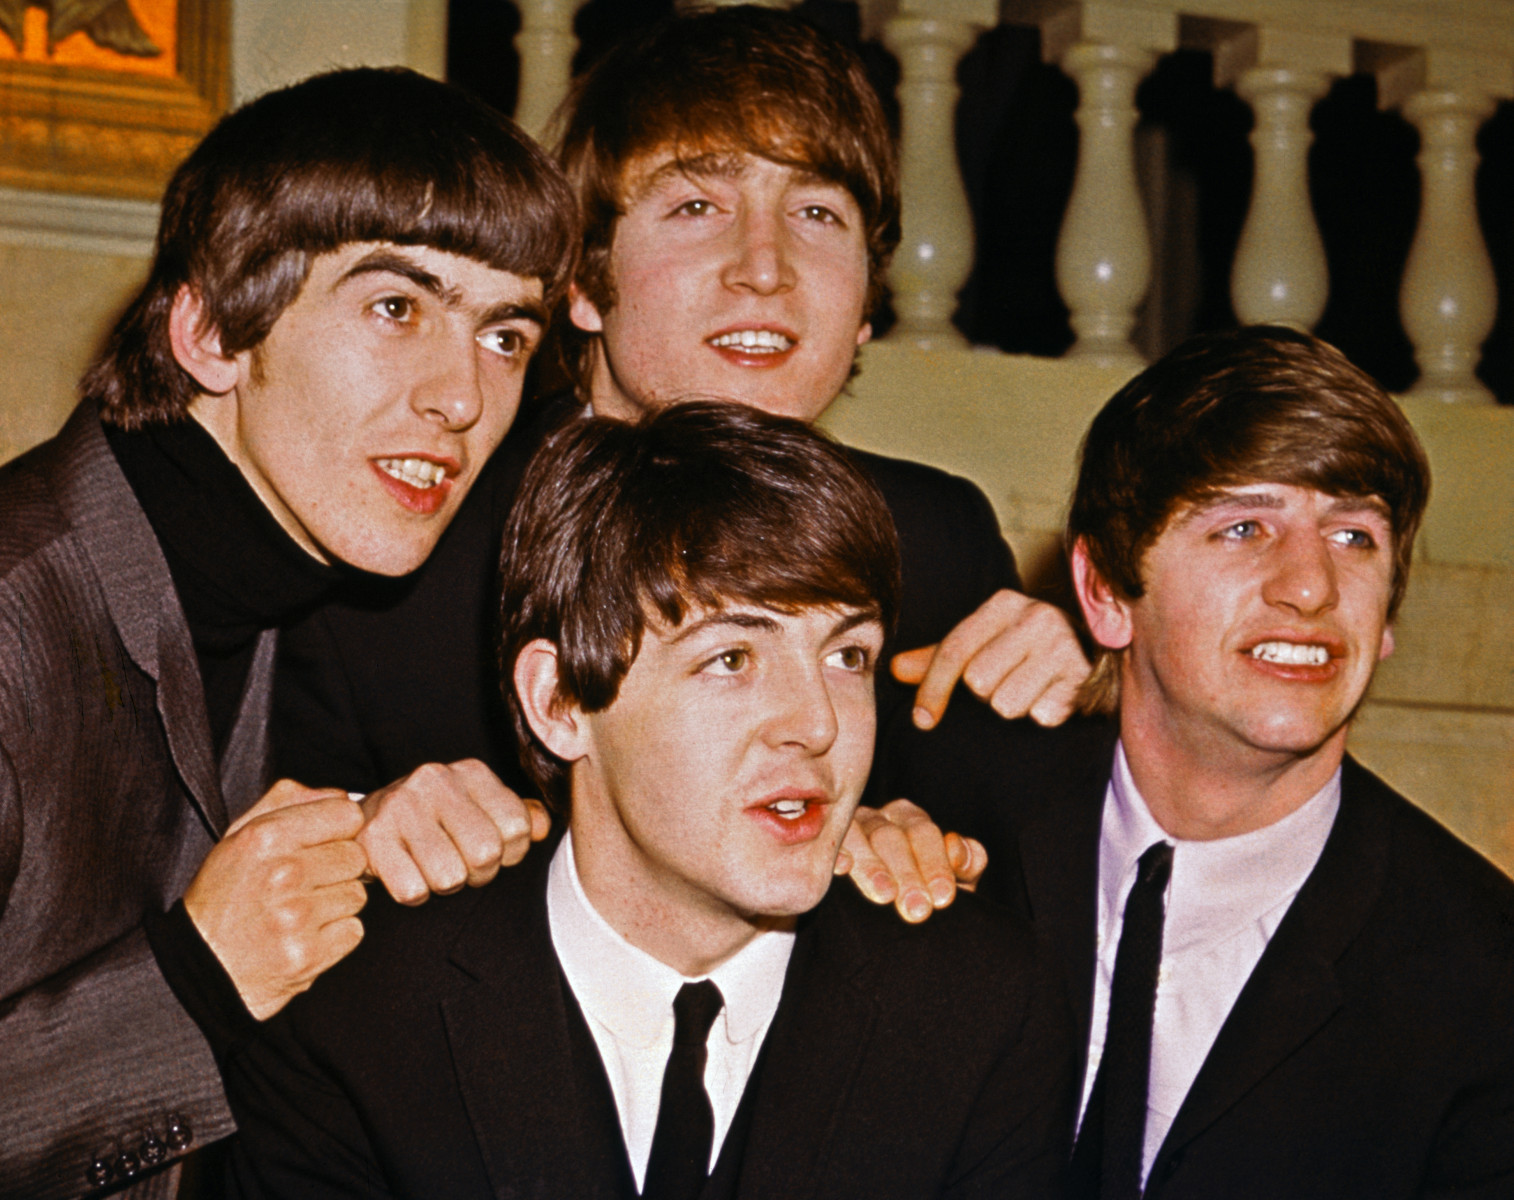 Can You Answer All 20 of These Super Easy Trivia Questions Correctly? The Beatles Smiling